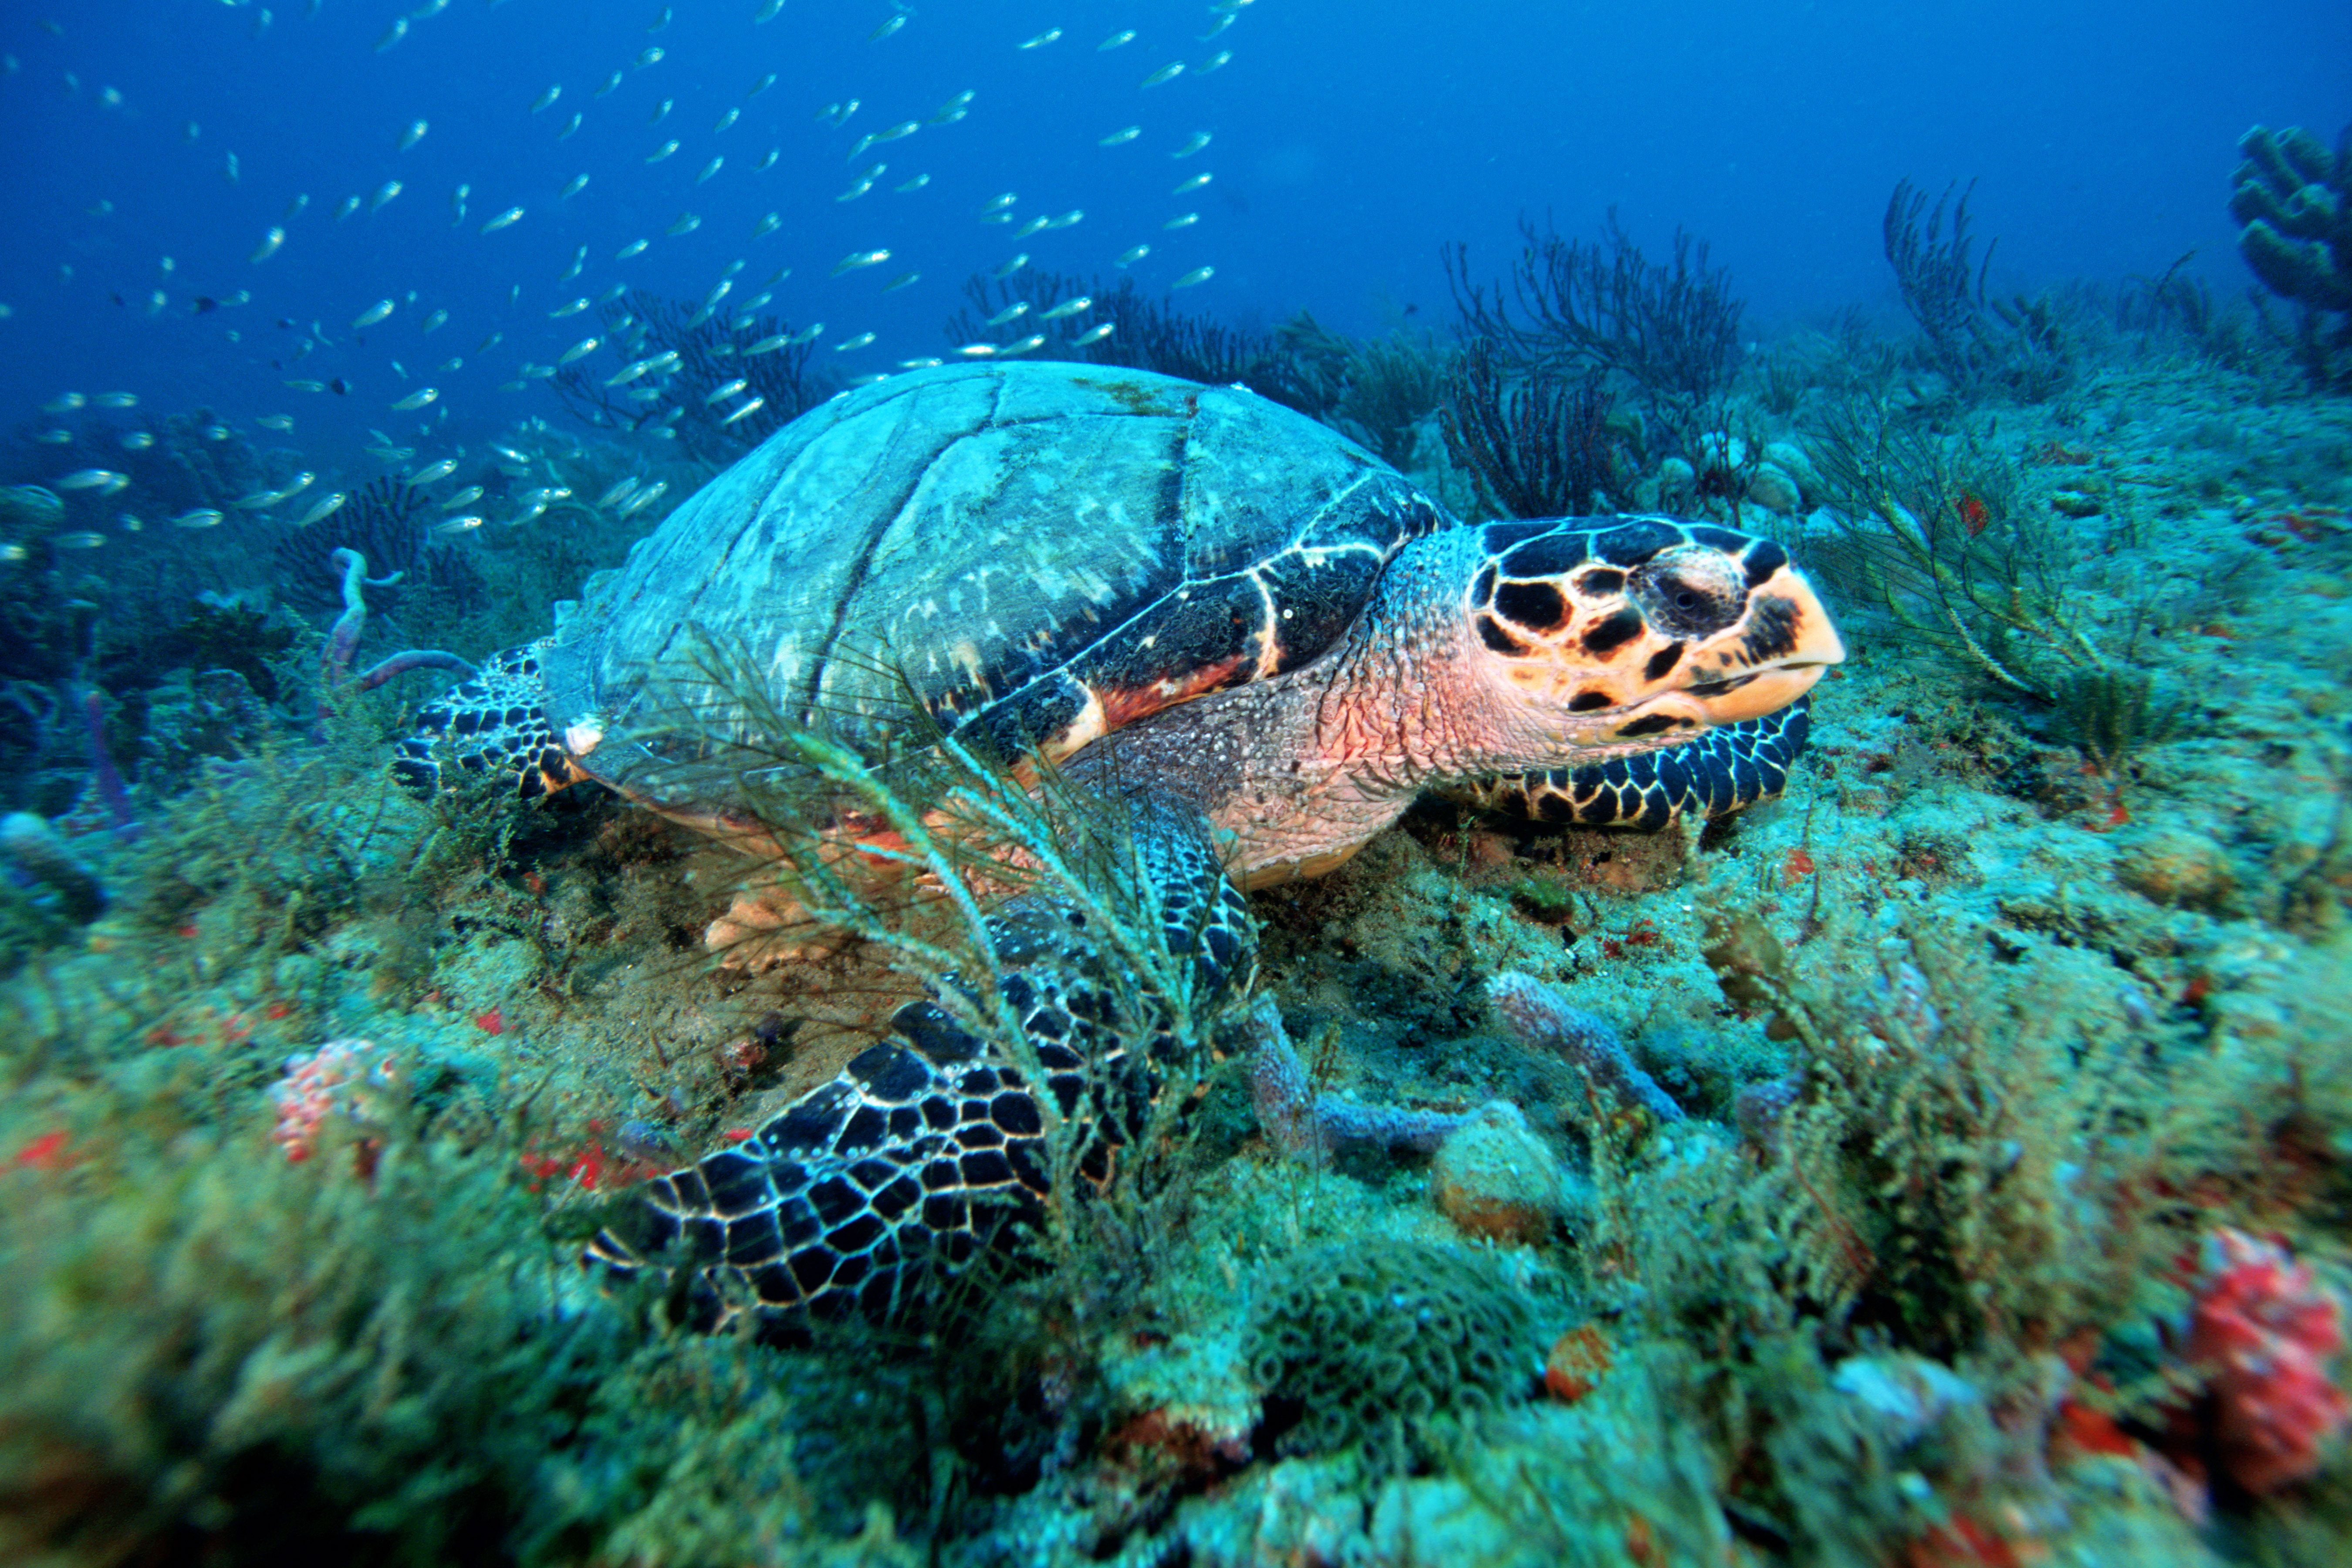 The endangered Hawksbill turtle in the Atlantic Ocean off the Florida coast. 